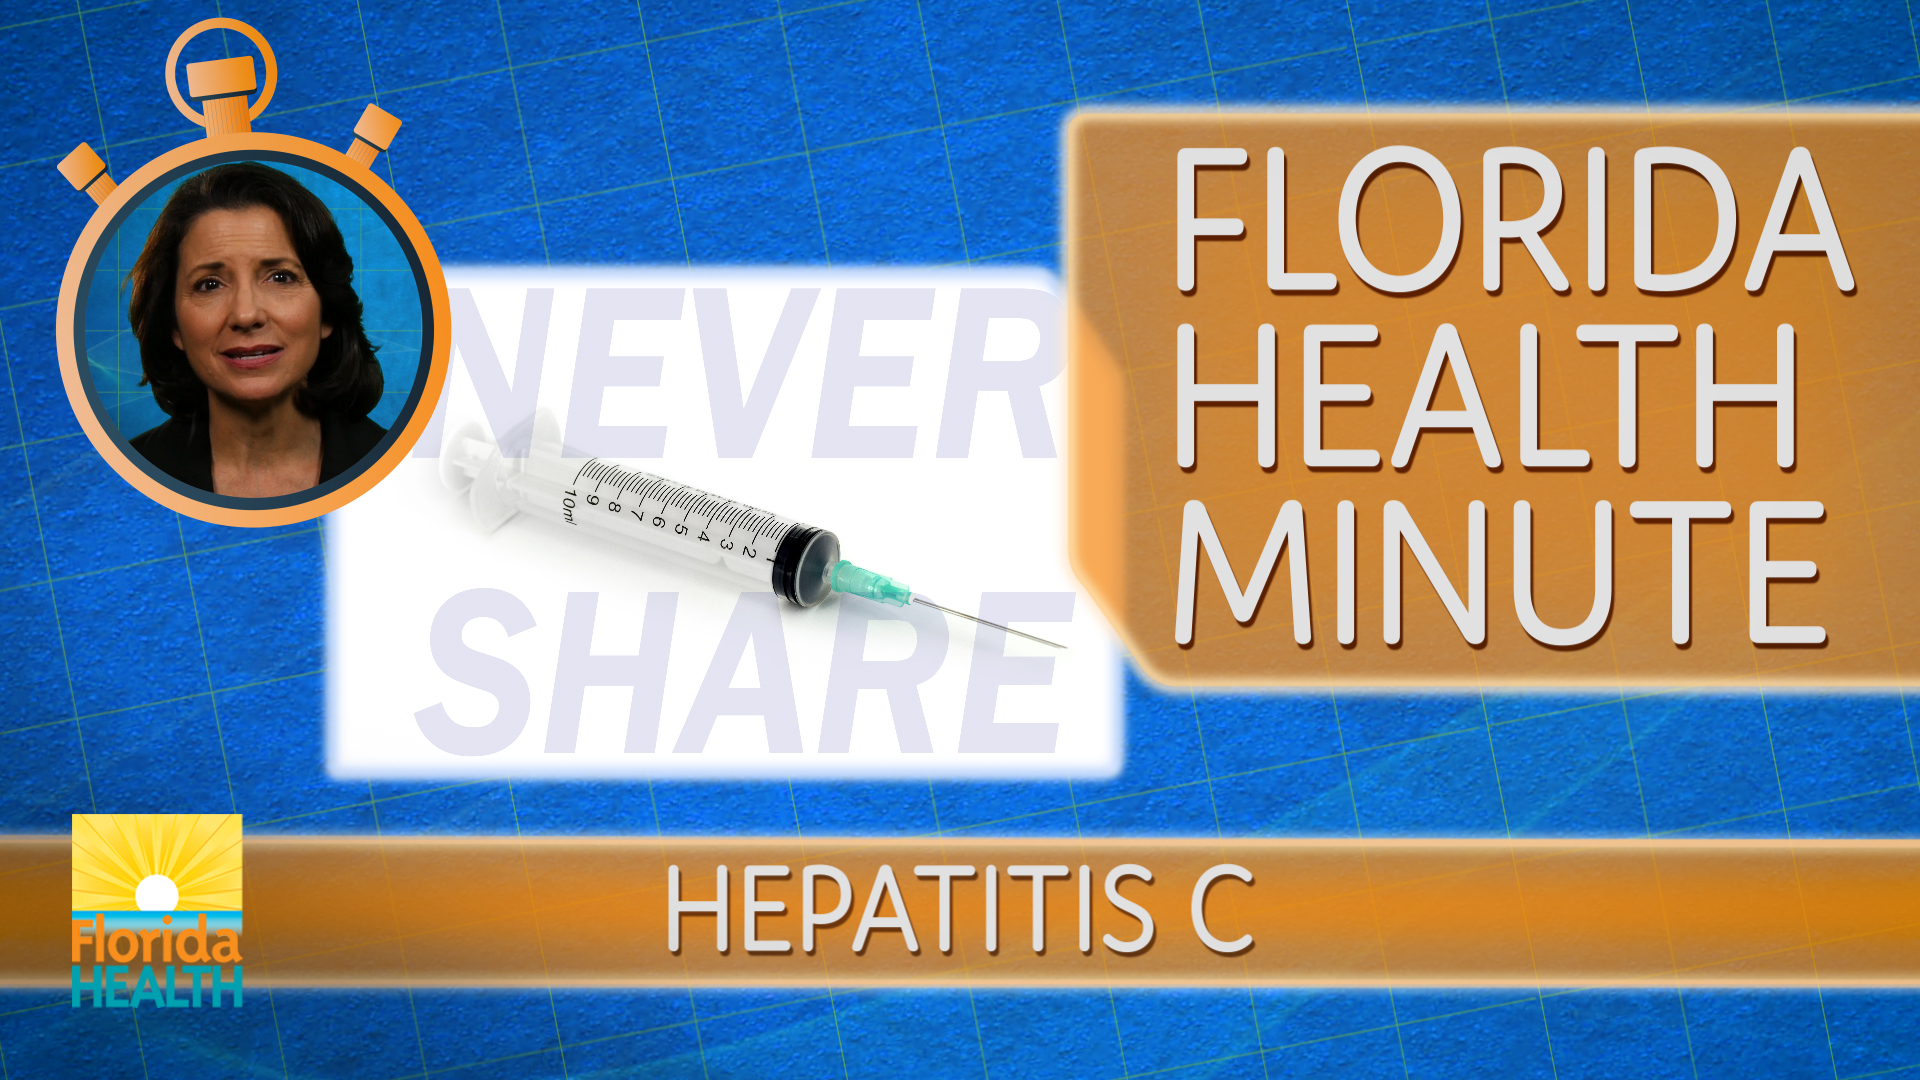 the Hepatitis C toolkit does not have an image associated with it, a blank white image is a default place holder.